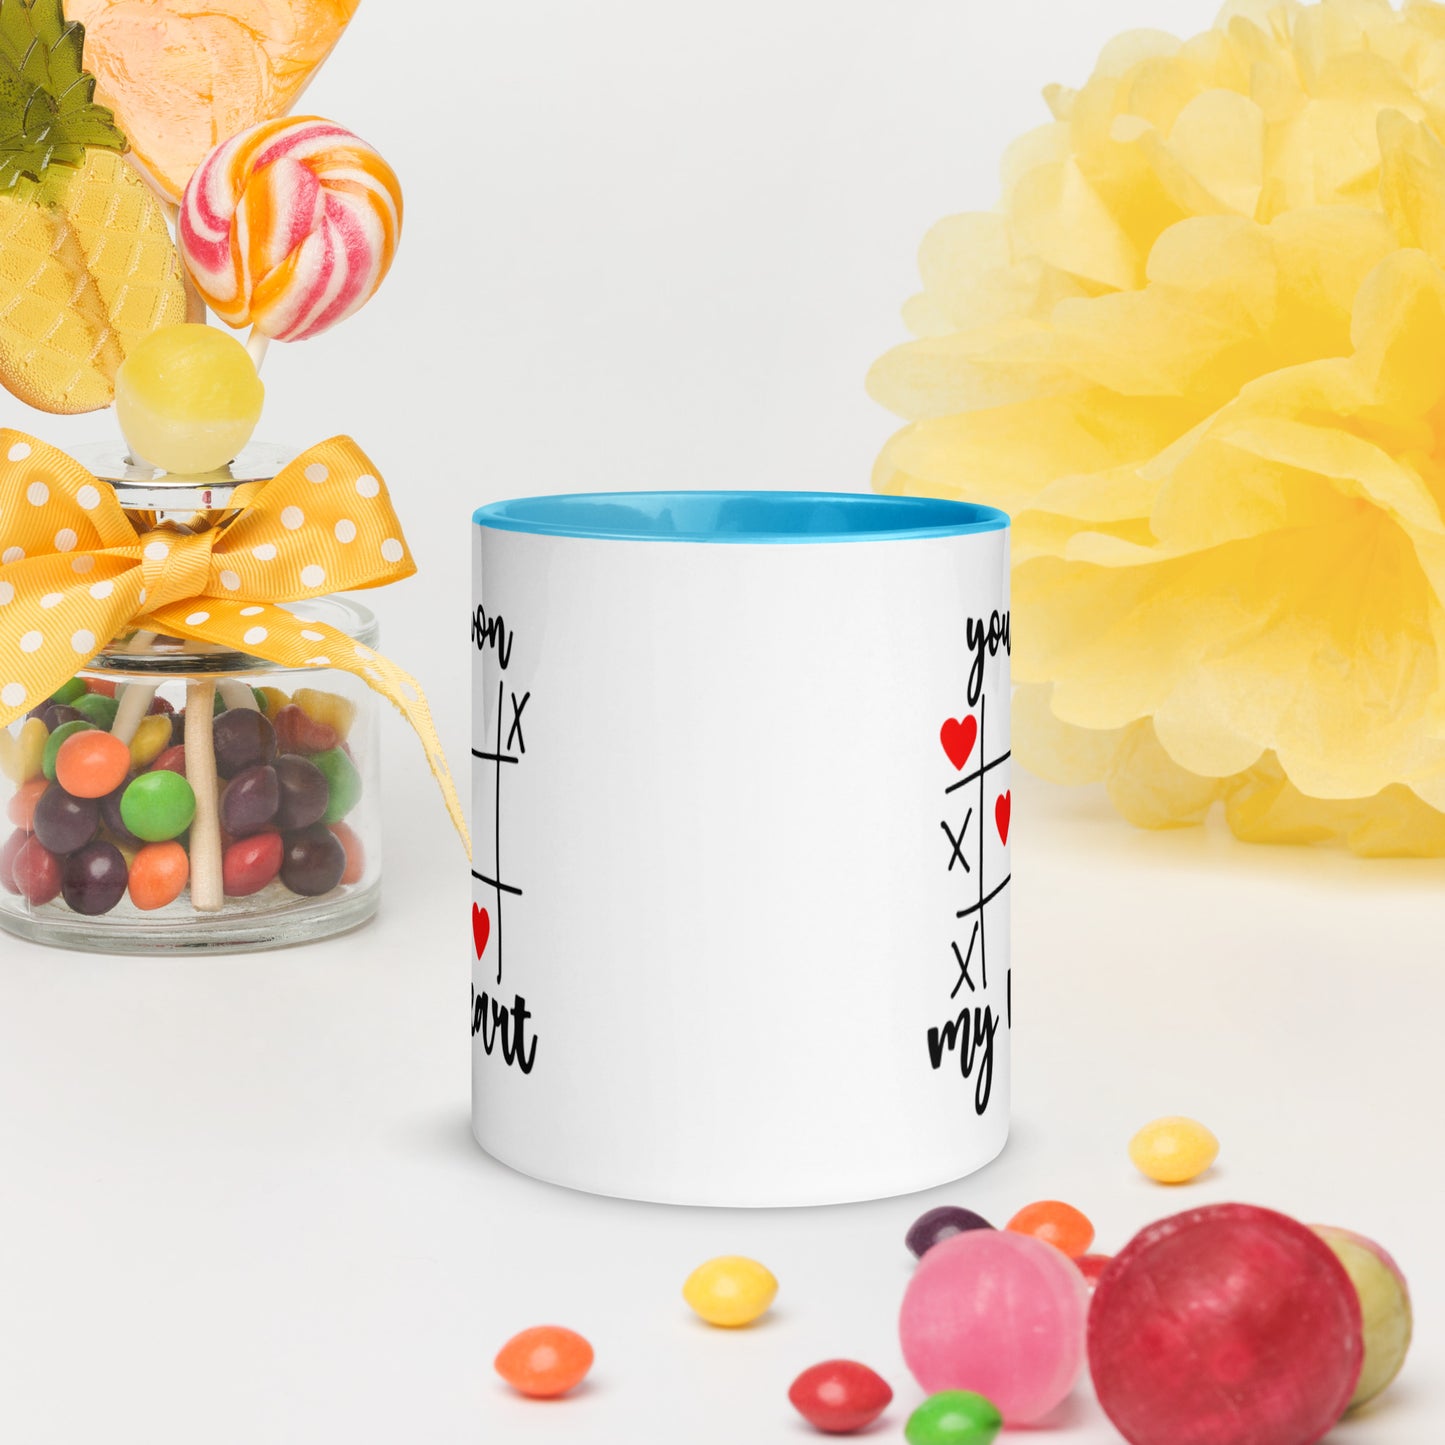 You Won My Heart Tic-Tac-Toe Game Happy Valentines Day Lovers Heart Coffee Mug with Color Inside